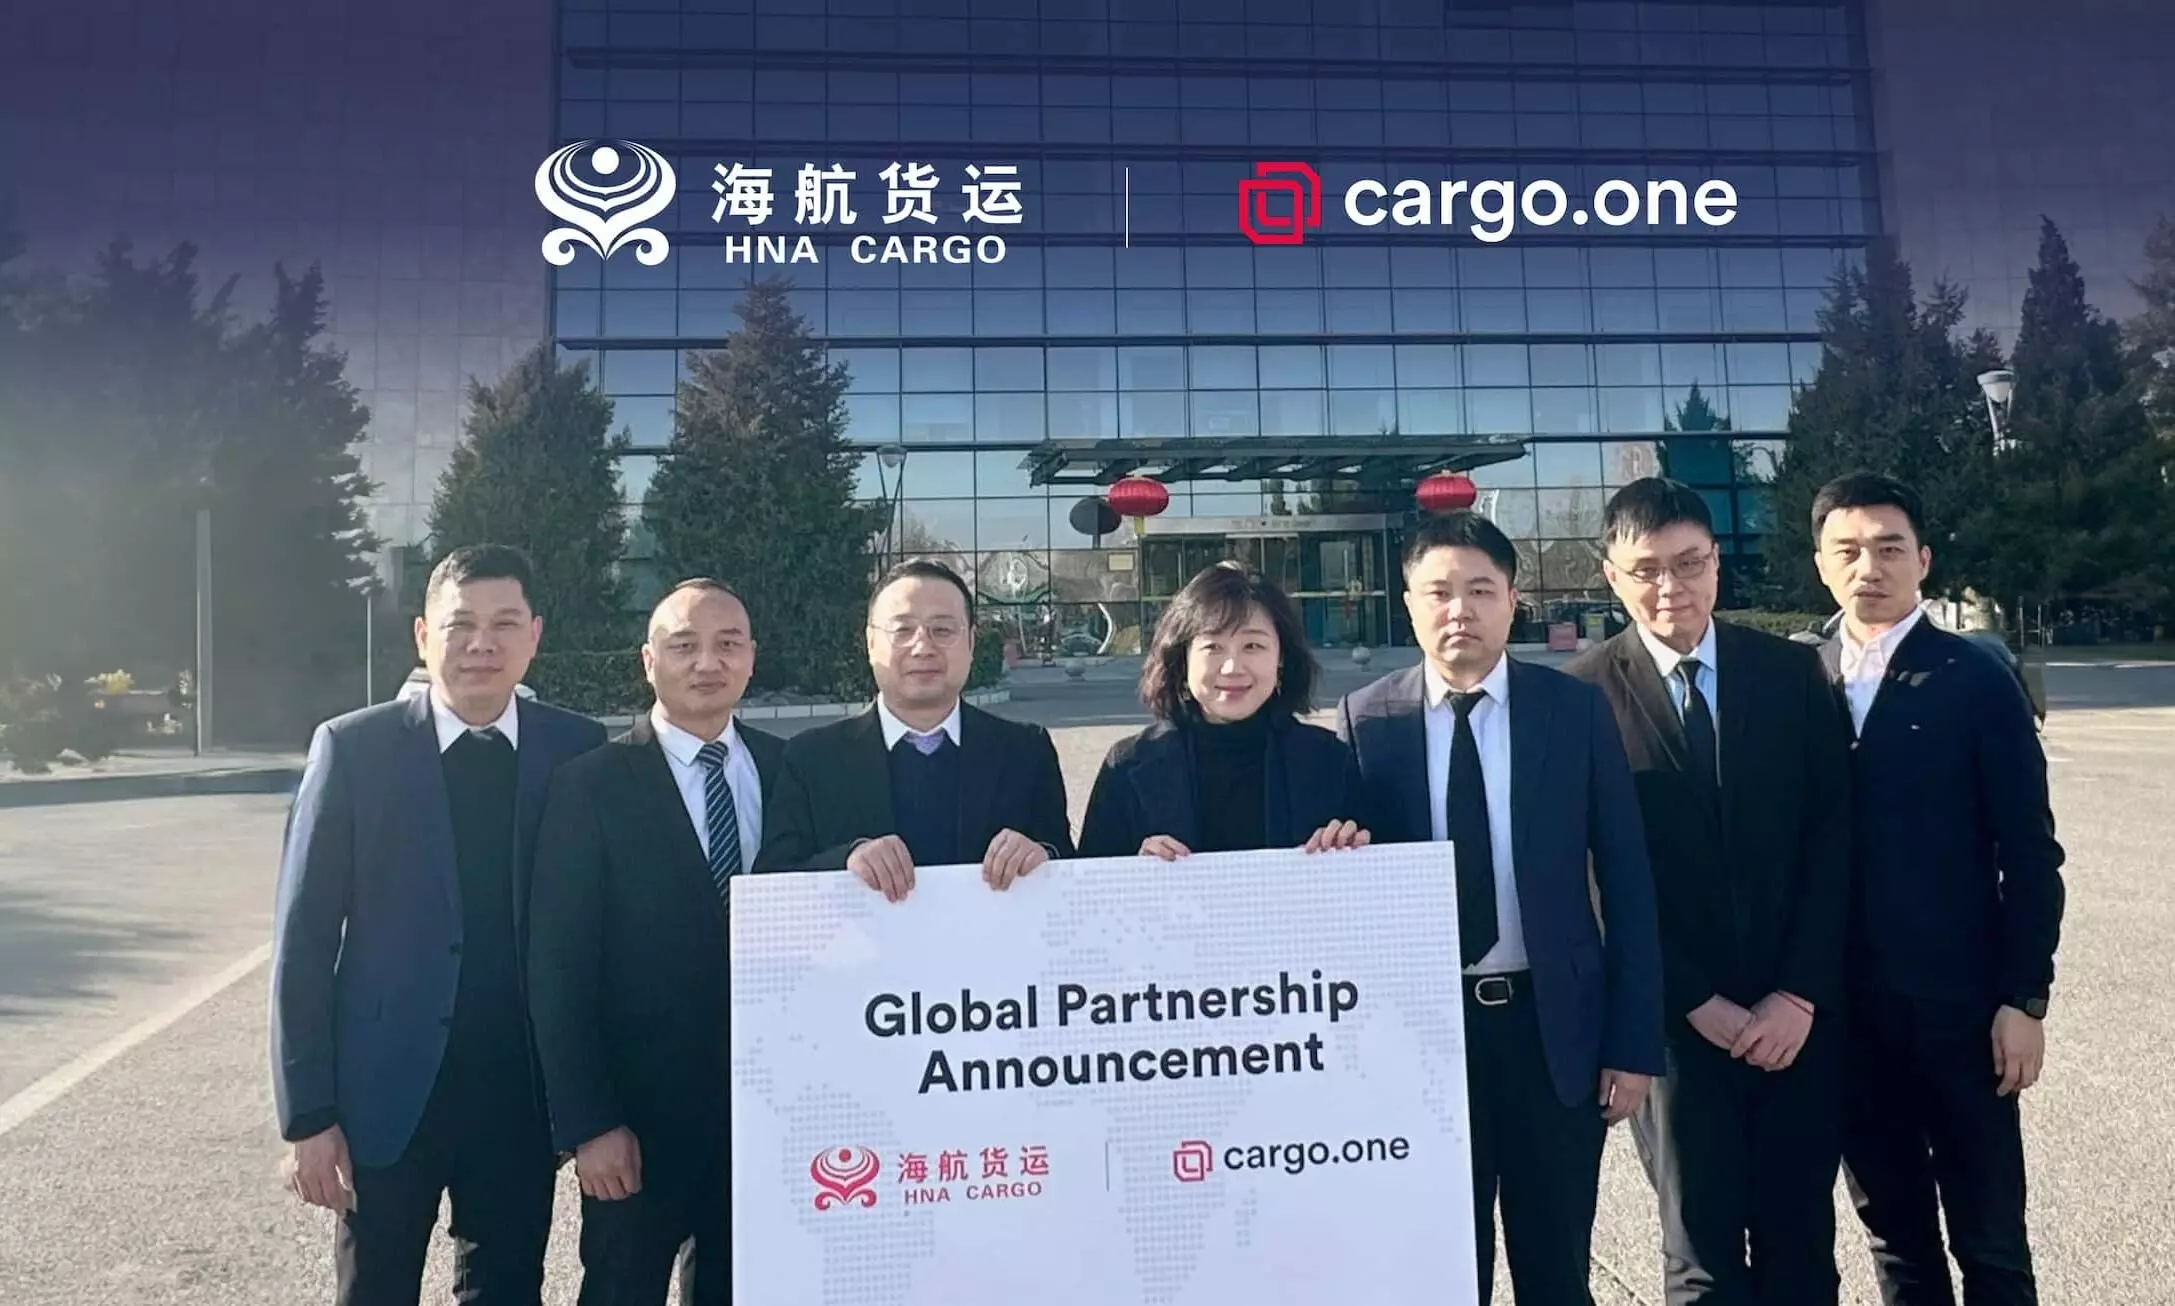 HNA Cargo signs deal with cargo.one for digital bookings